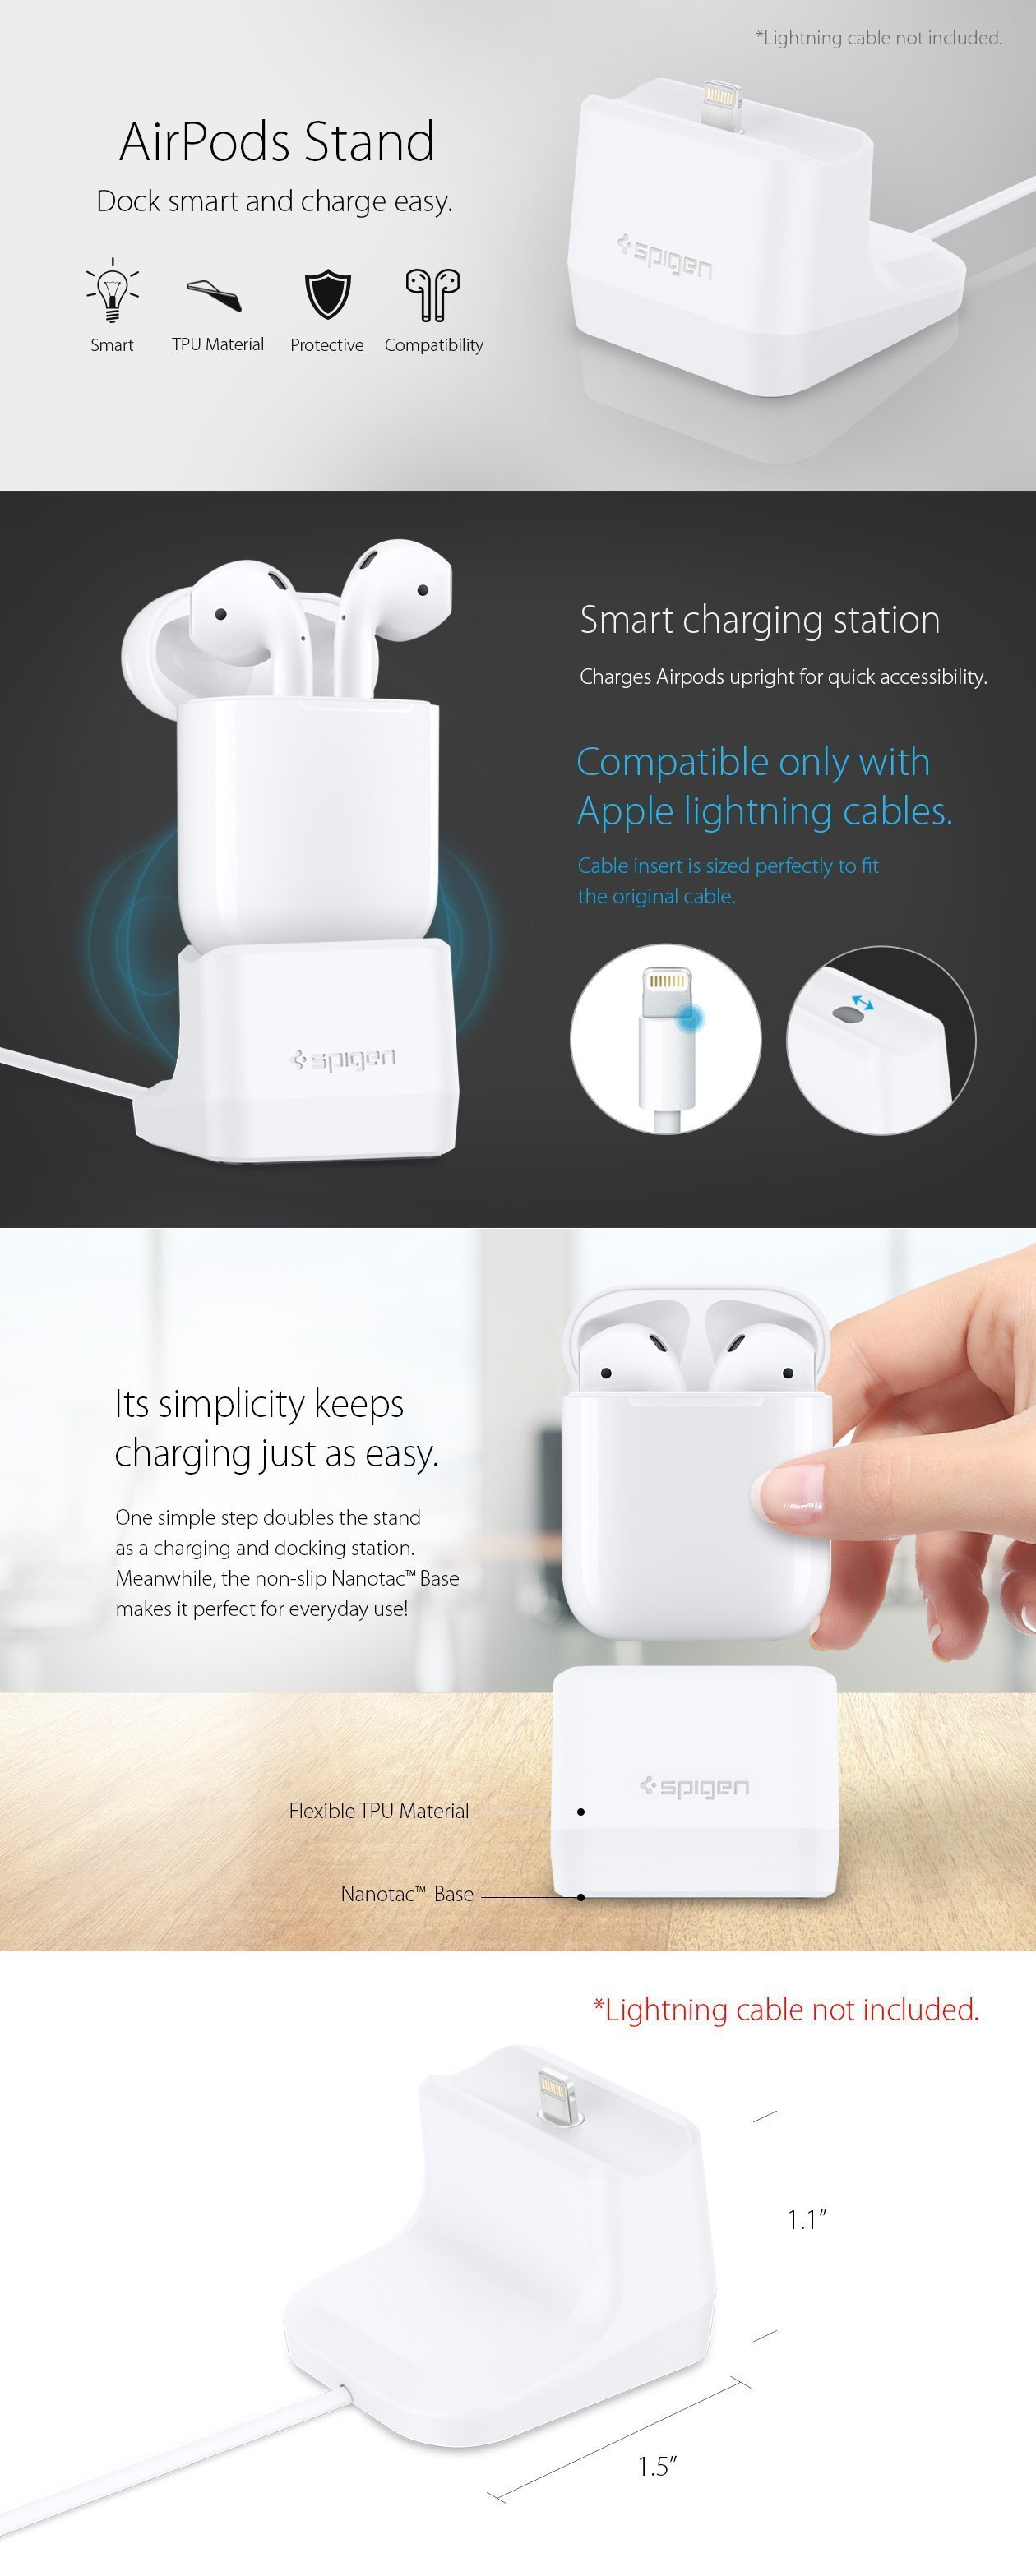 longd airpods stand